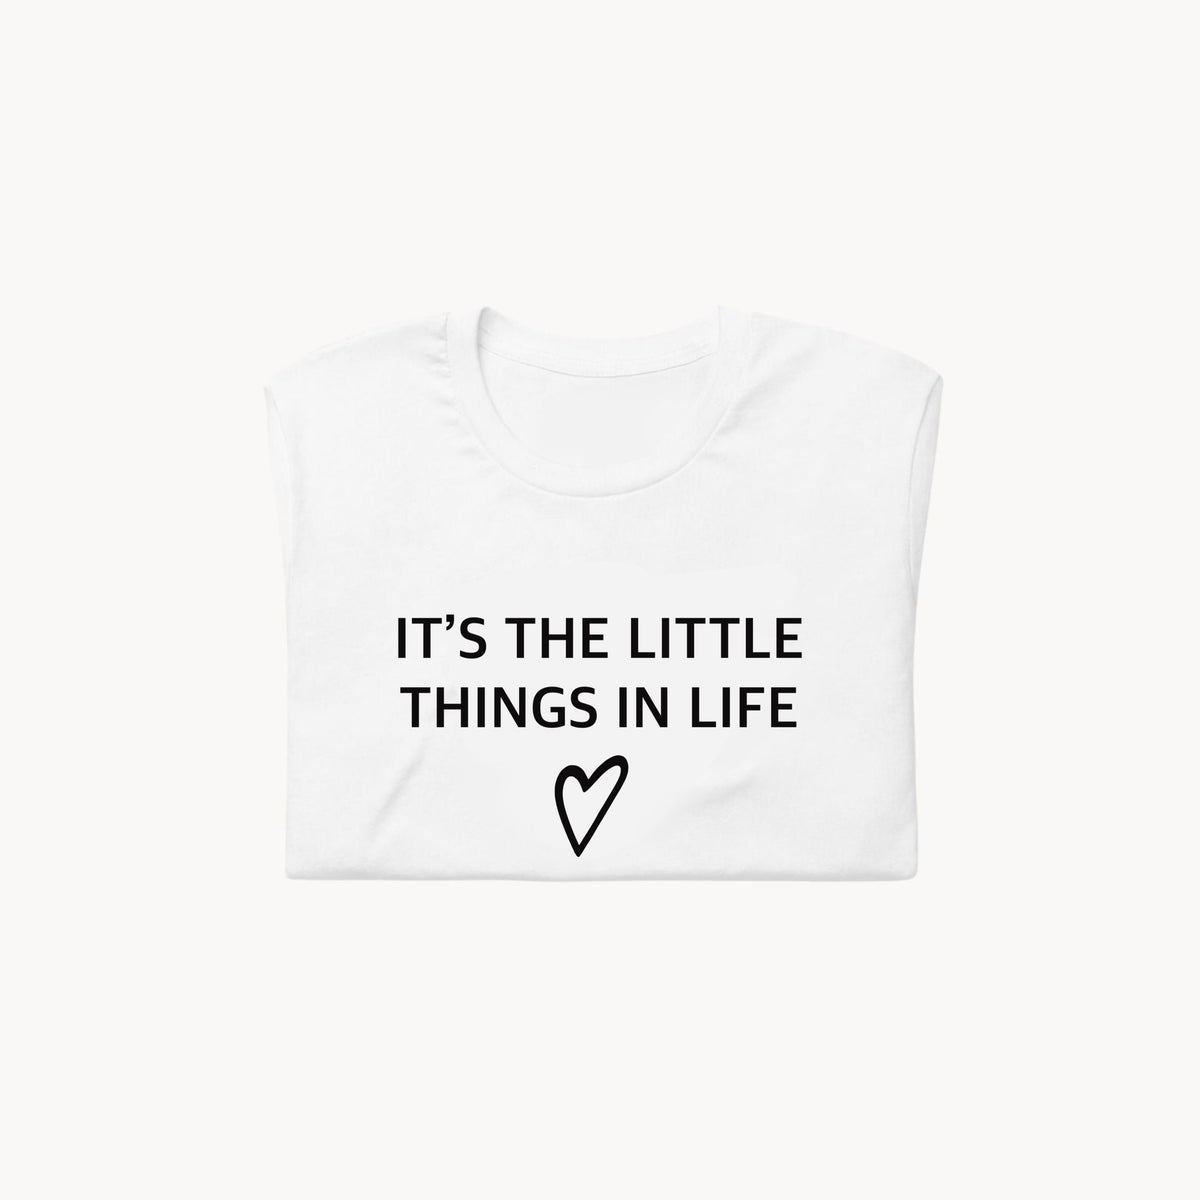 ITS THE LITTLE THINGS IN LIFE T-SHIRT